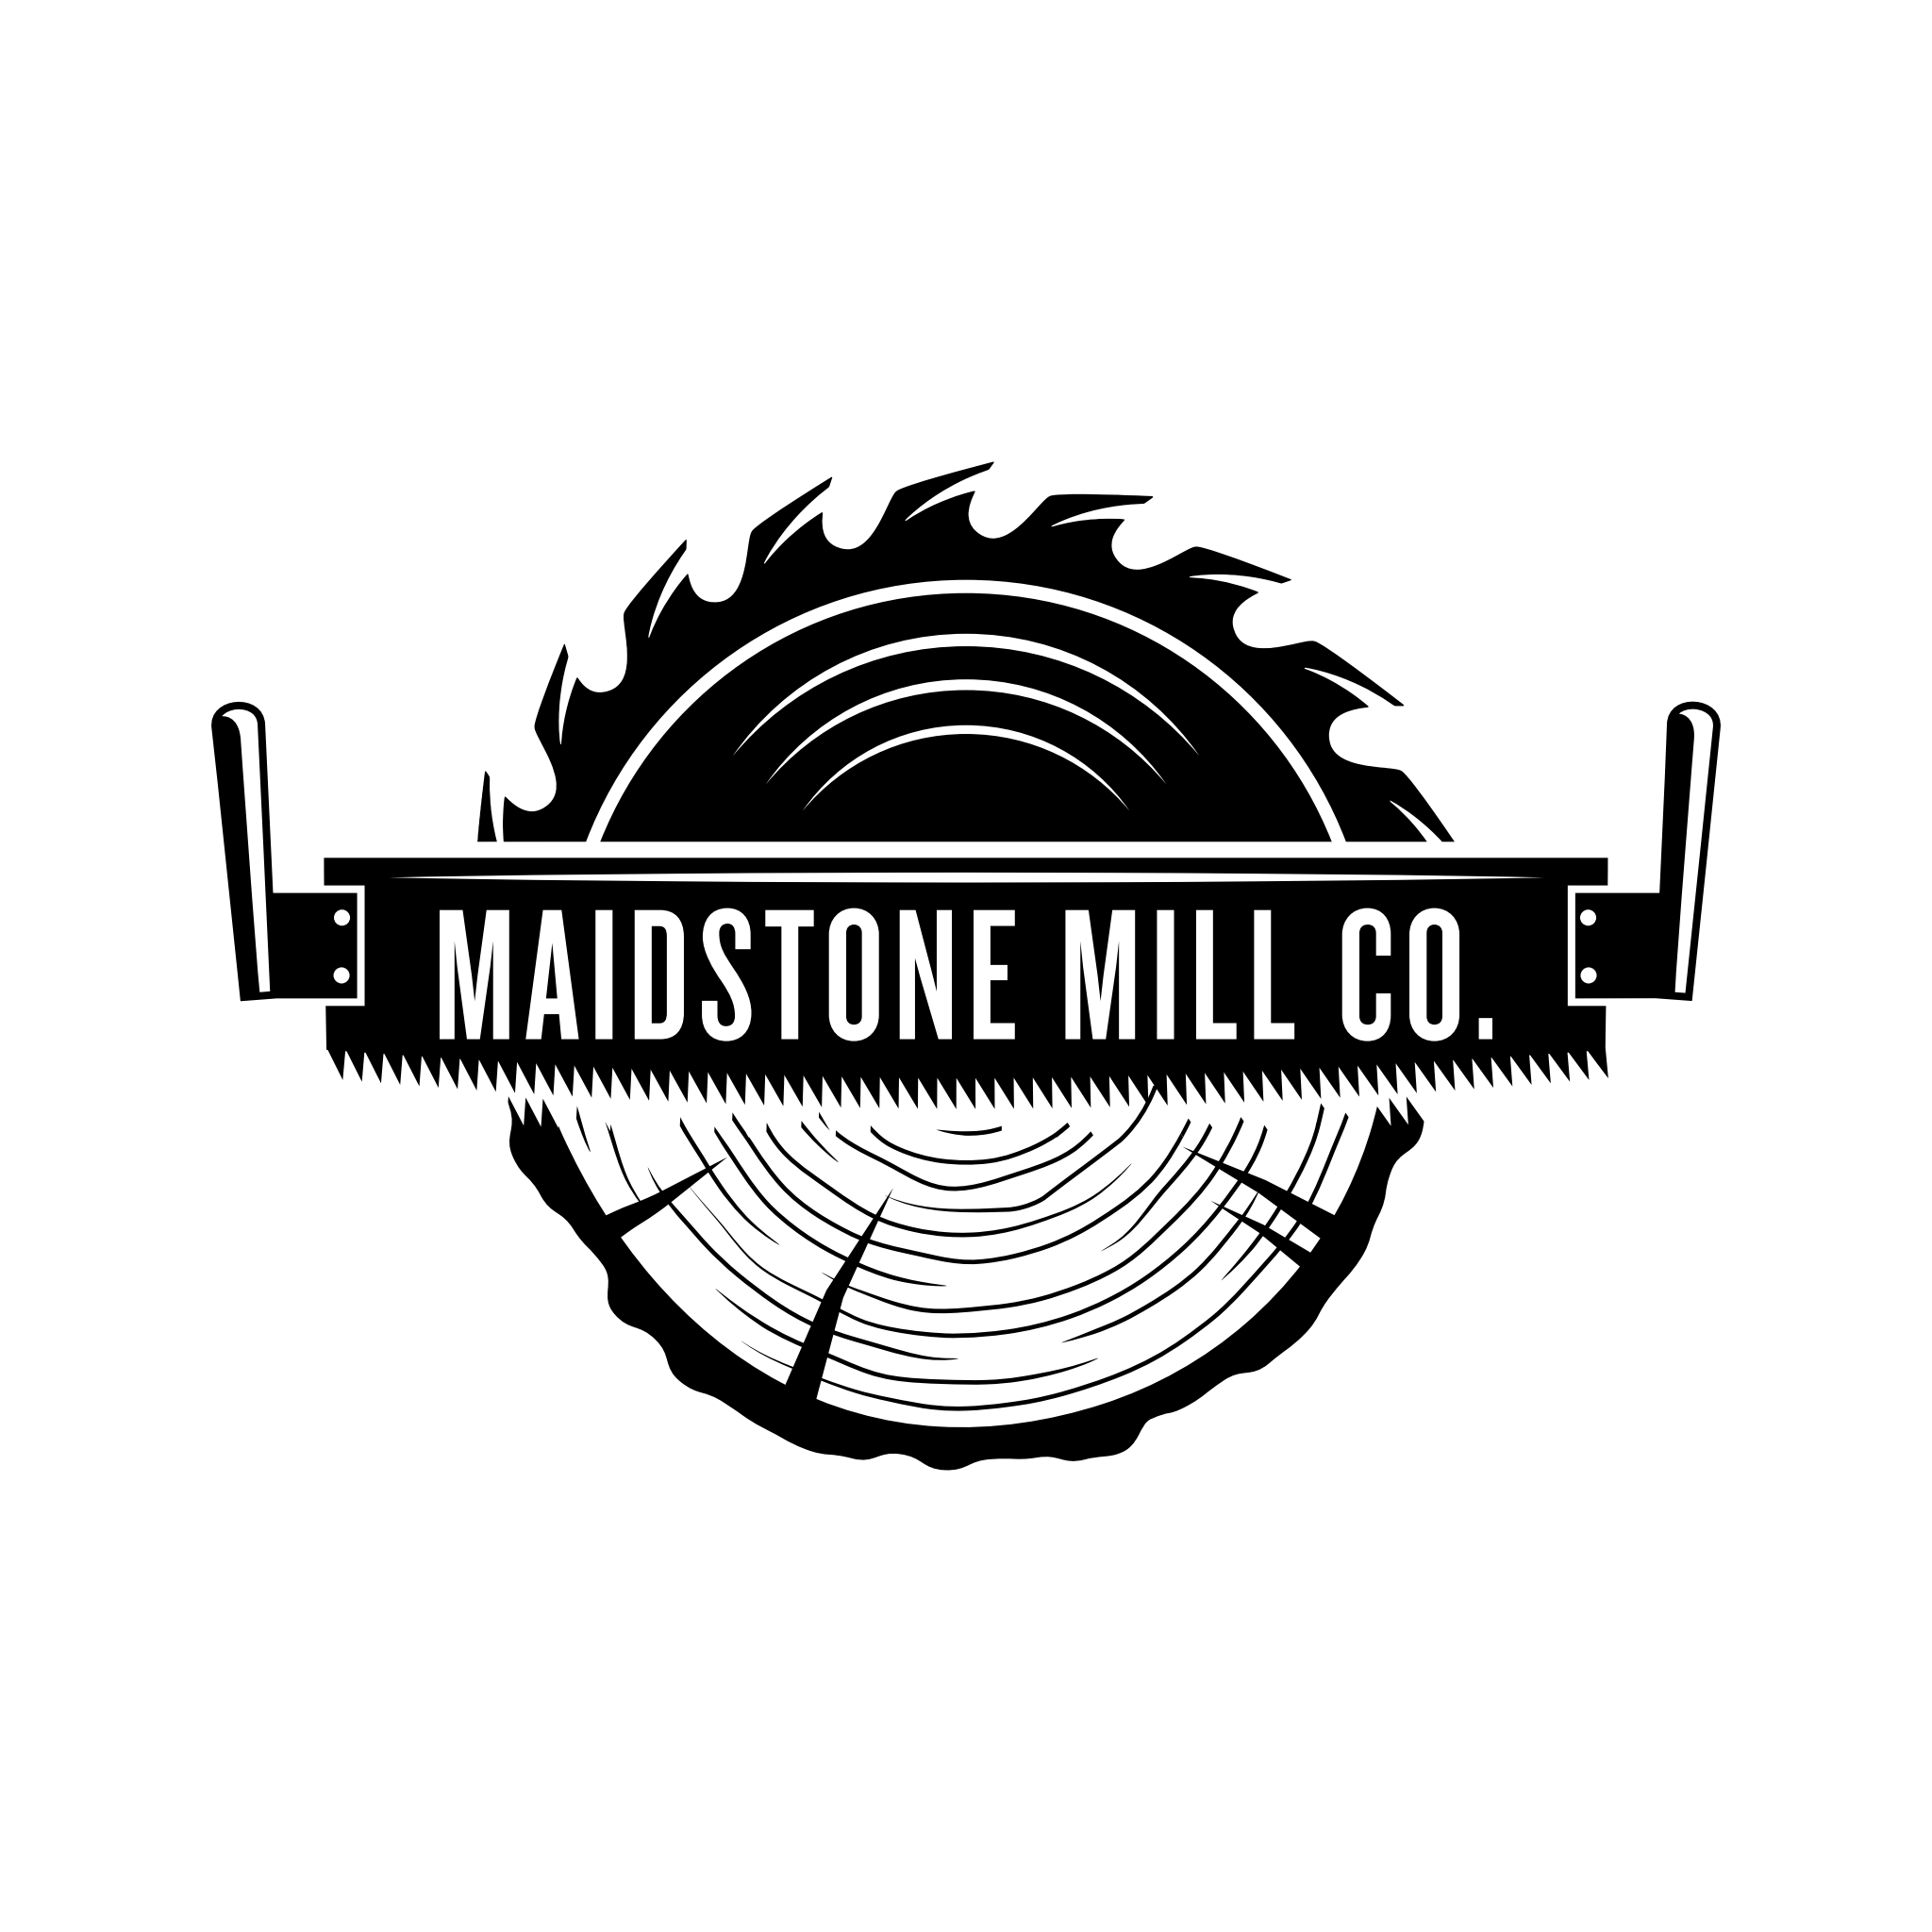 Maidstone Mill Co.